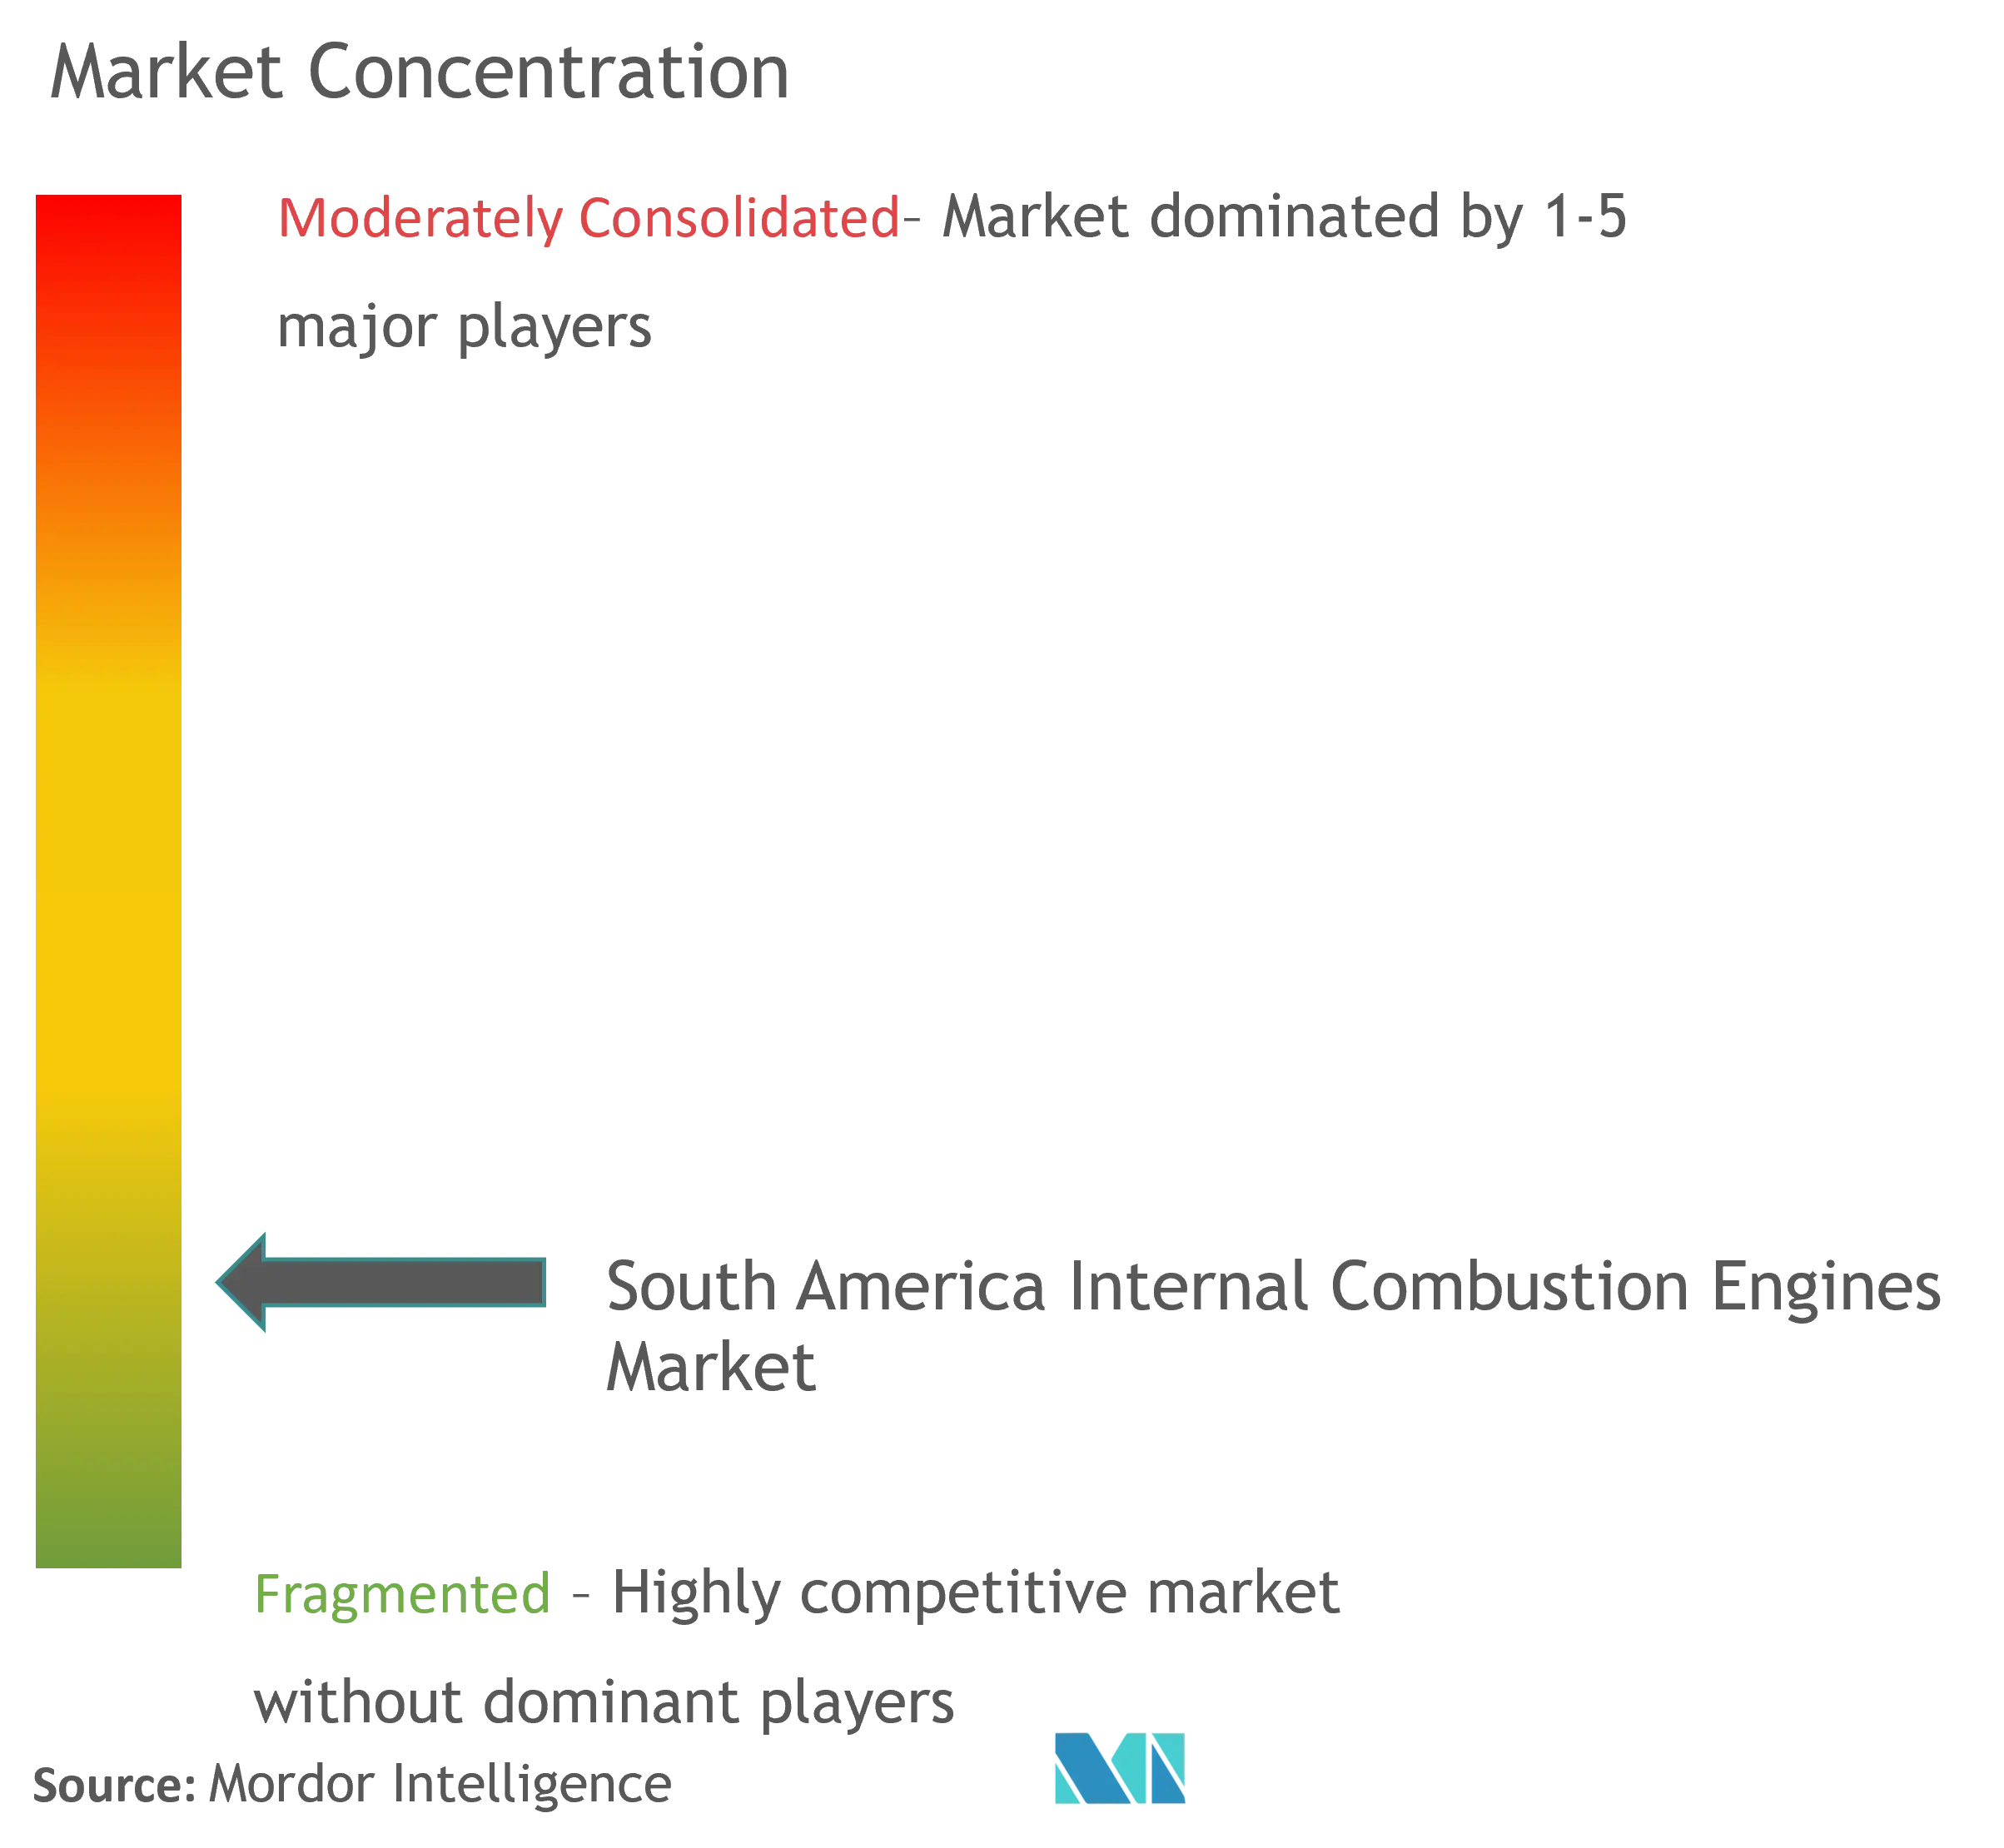 South America Internal Combustion Engines Market Concentration